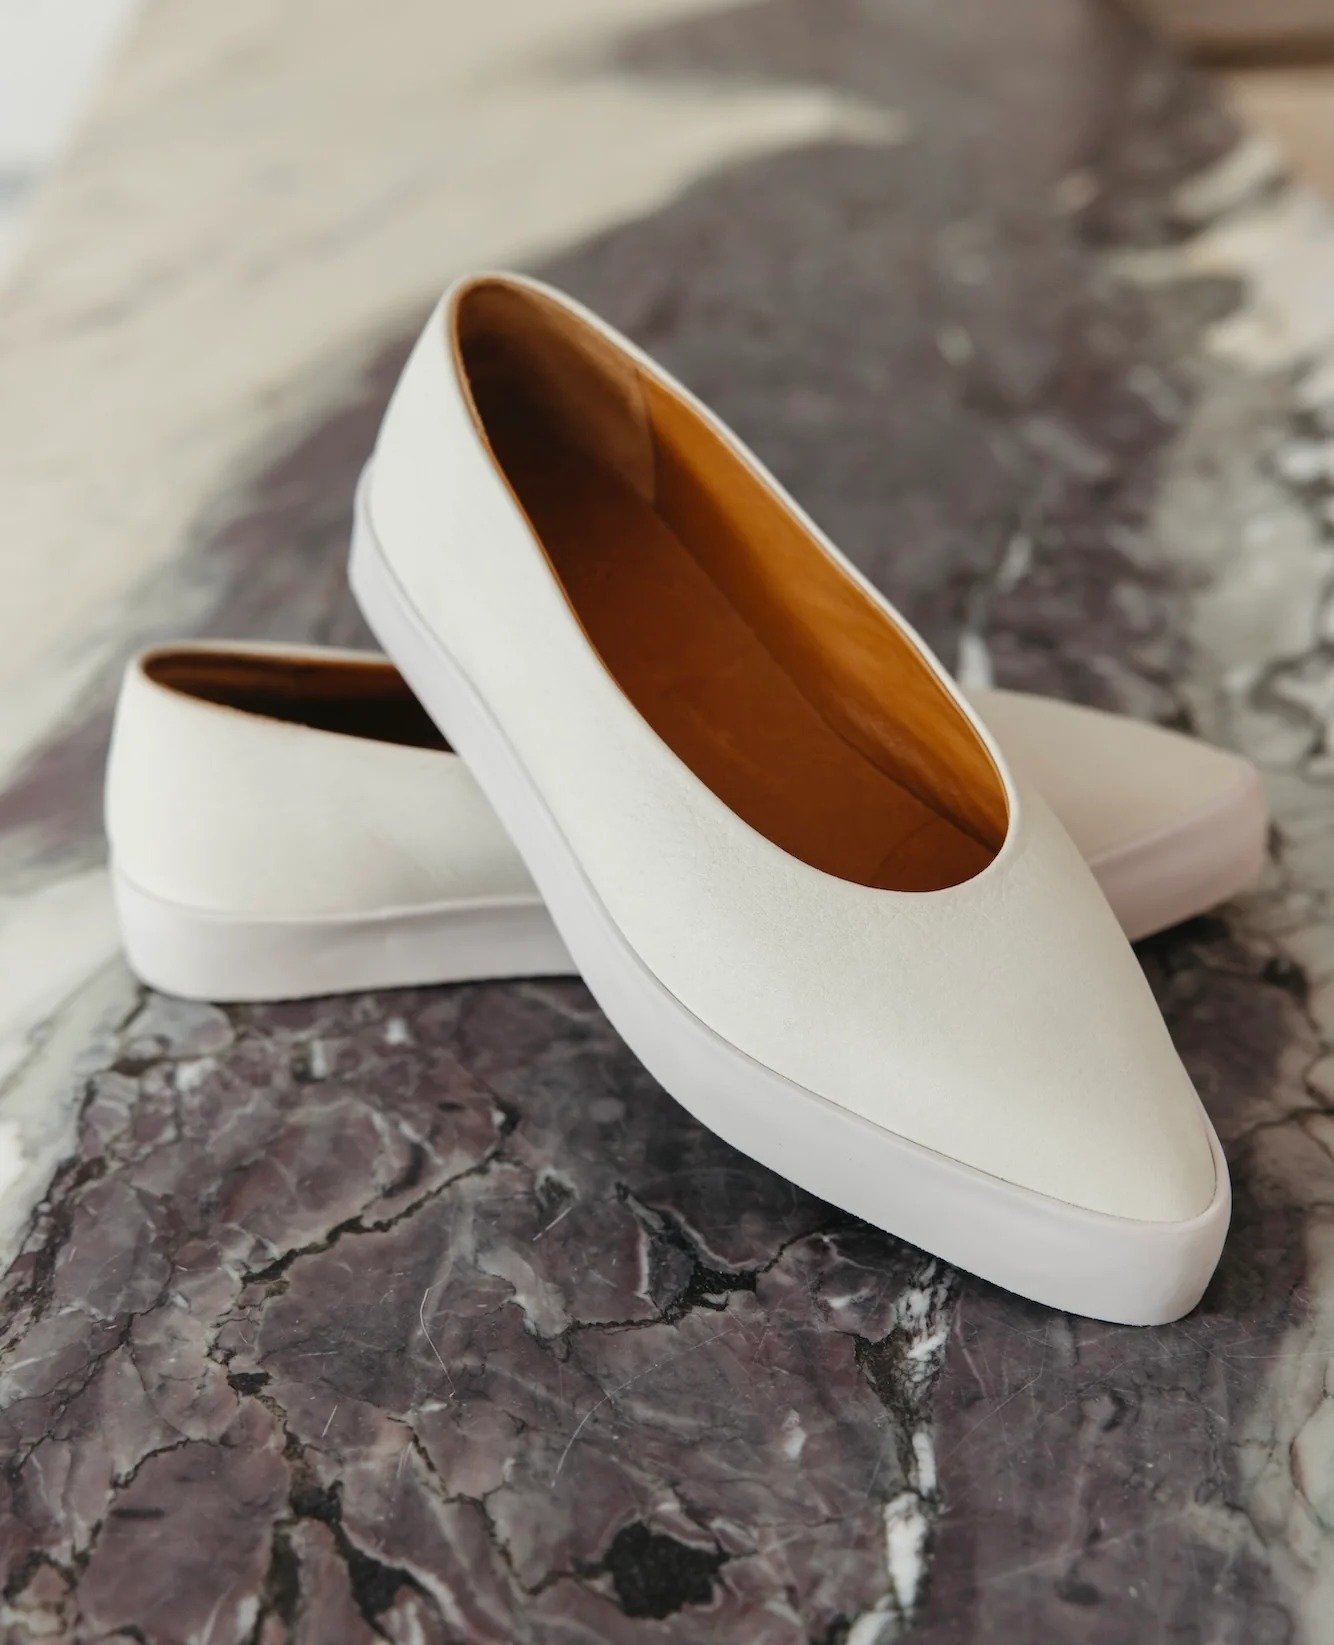 New footwear Friday: the Regal slip-on by Coclico, a sleek, pointed-toe suede flat in the most perfect neutral greige. In-stock now at Deborah Kent's South Tampa. Shop in-store today until 5:30 or online anytime at the link in our bio.